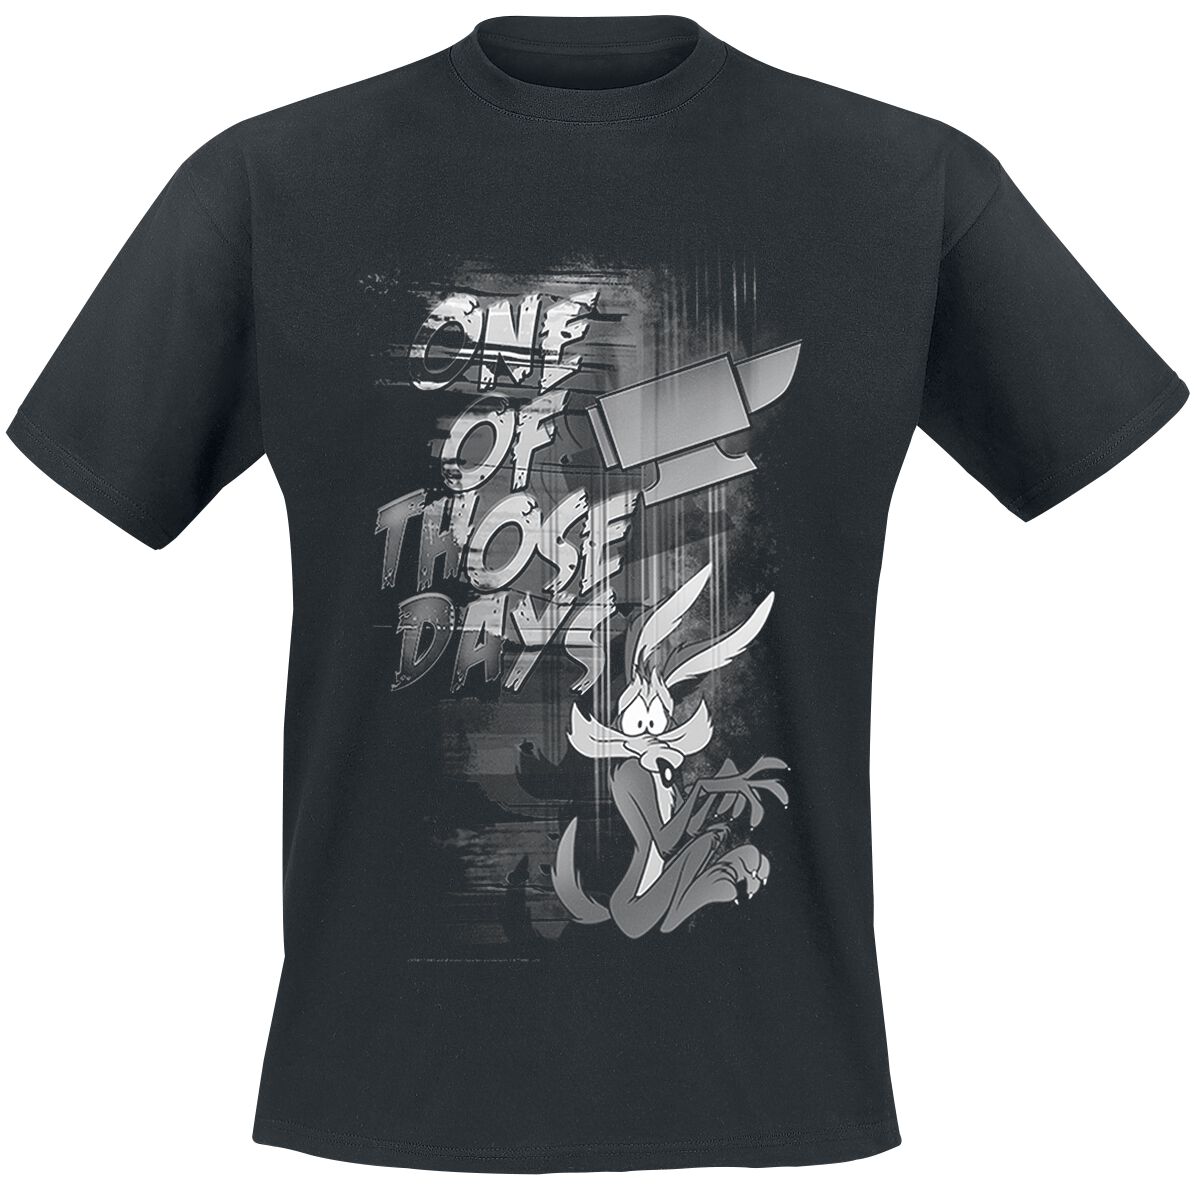 Image of T-Shirt di Looney Tunes - Coyote - Those days - S a XL - Uomo - nero